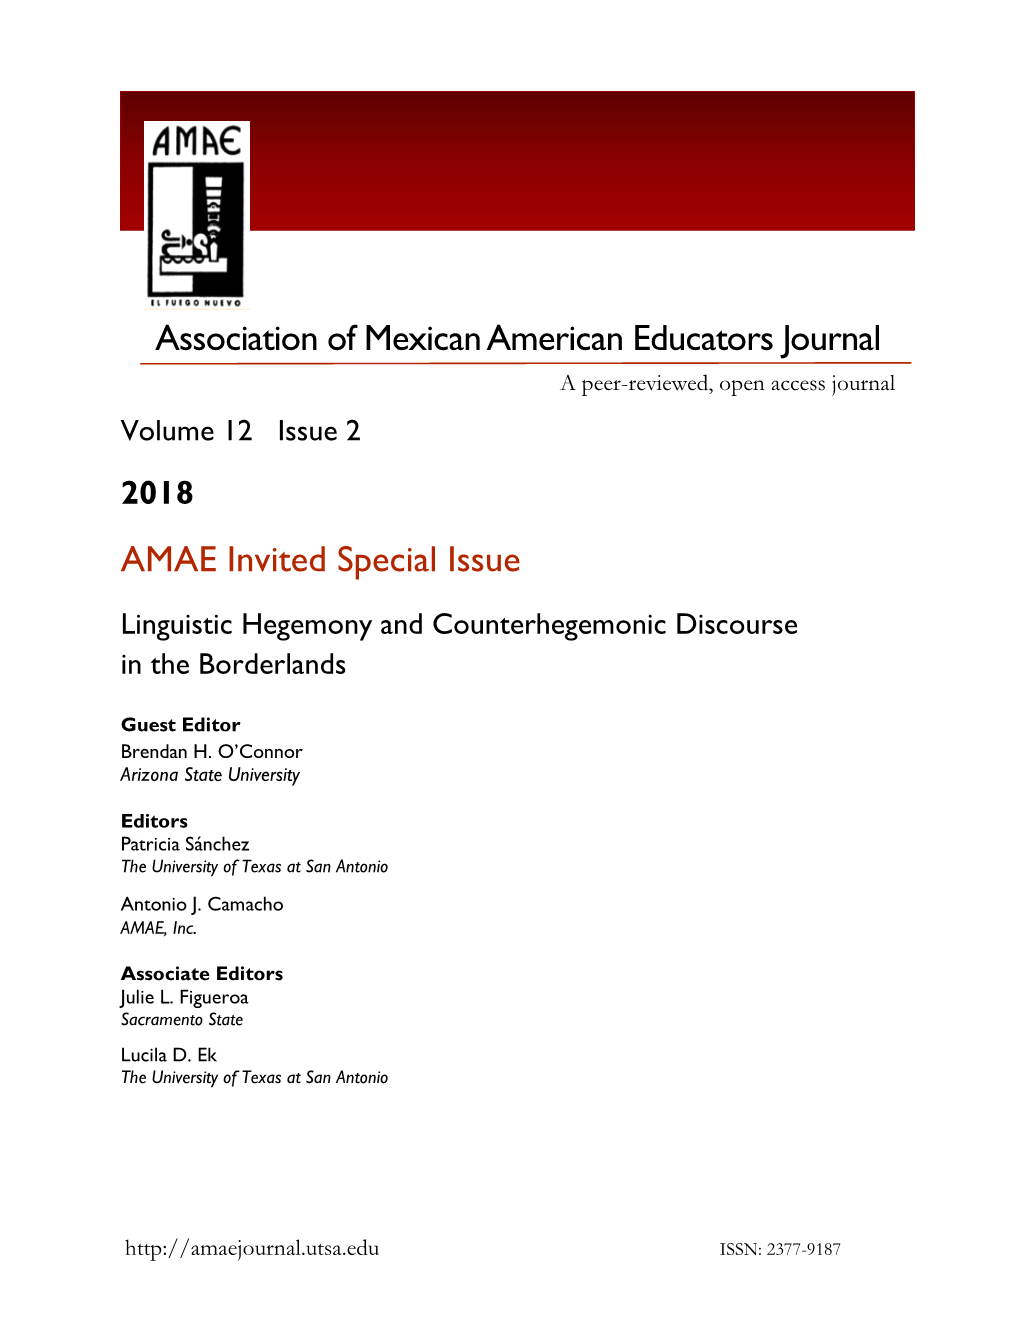 AMAE Invited Special Issue Association Of